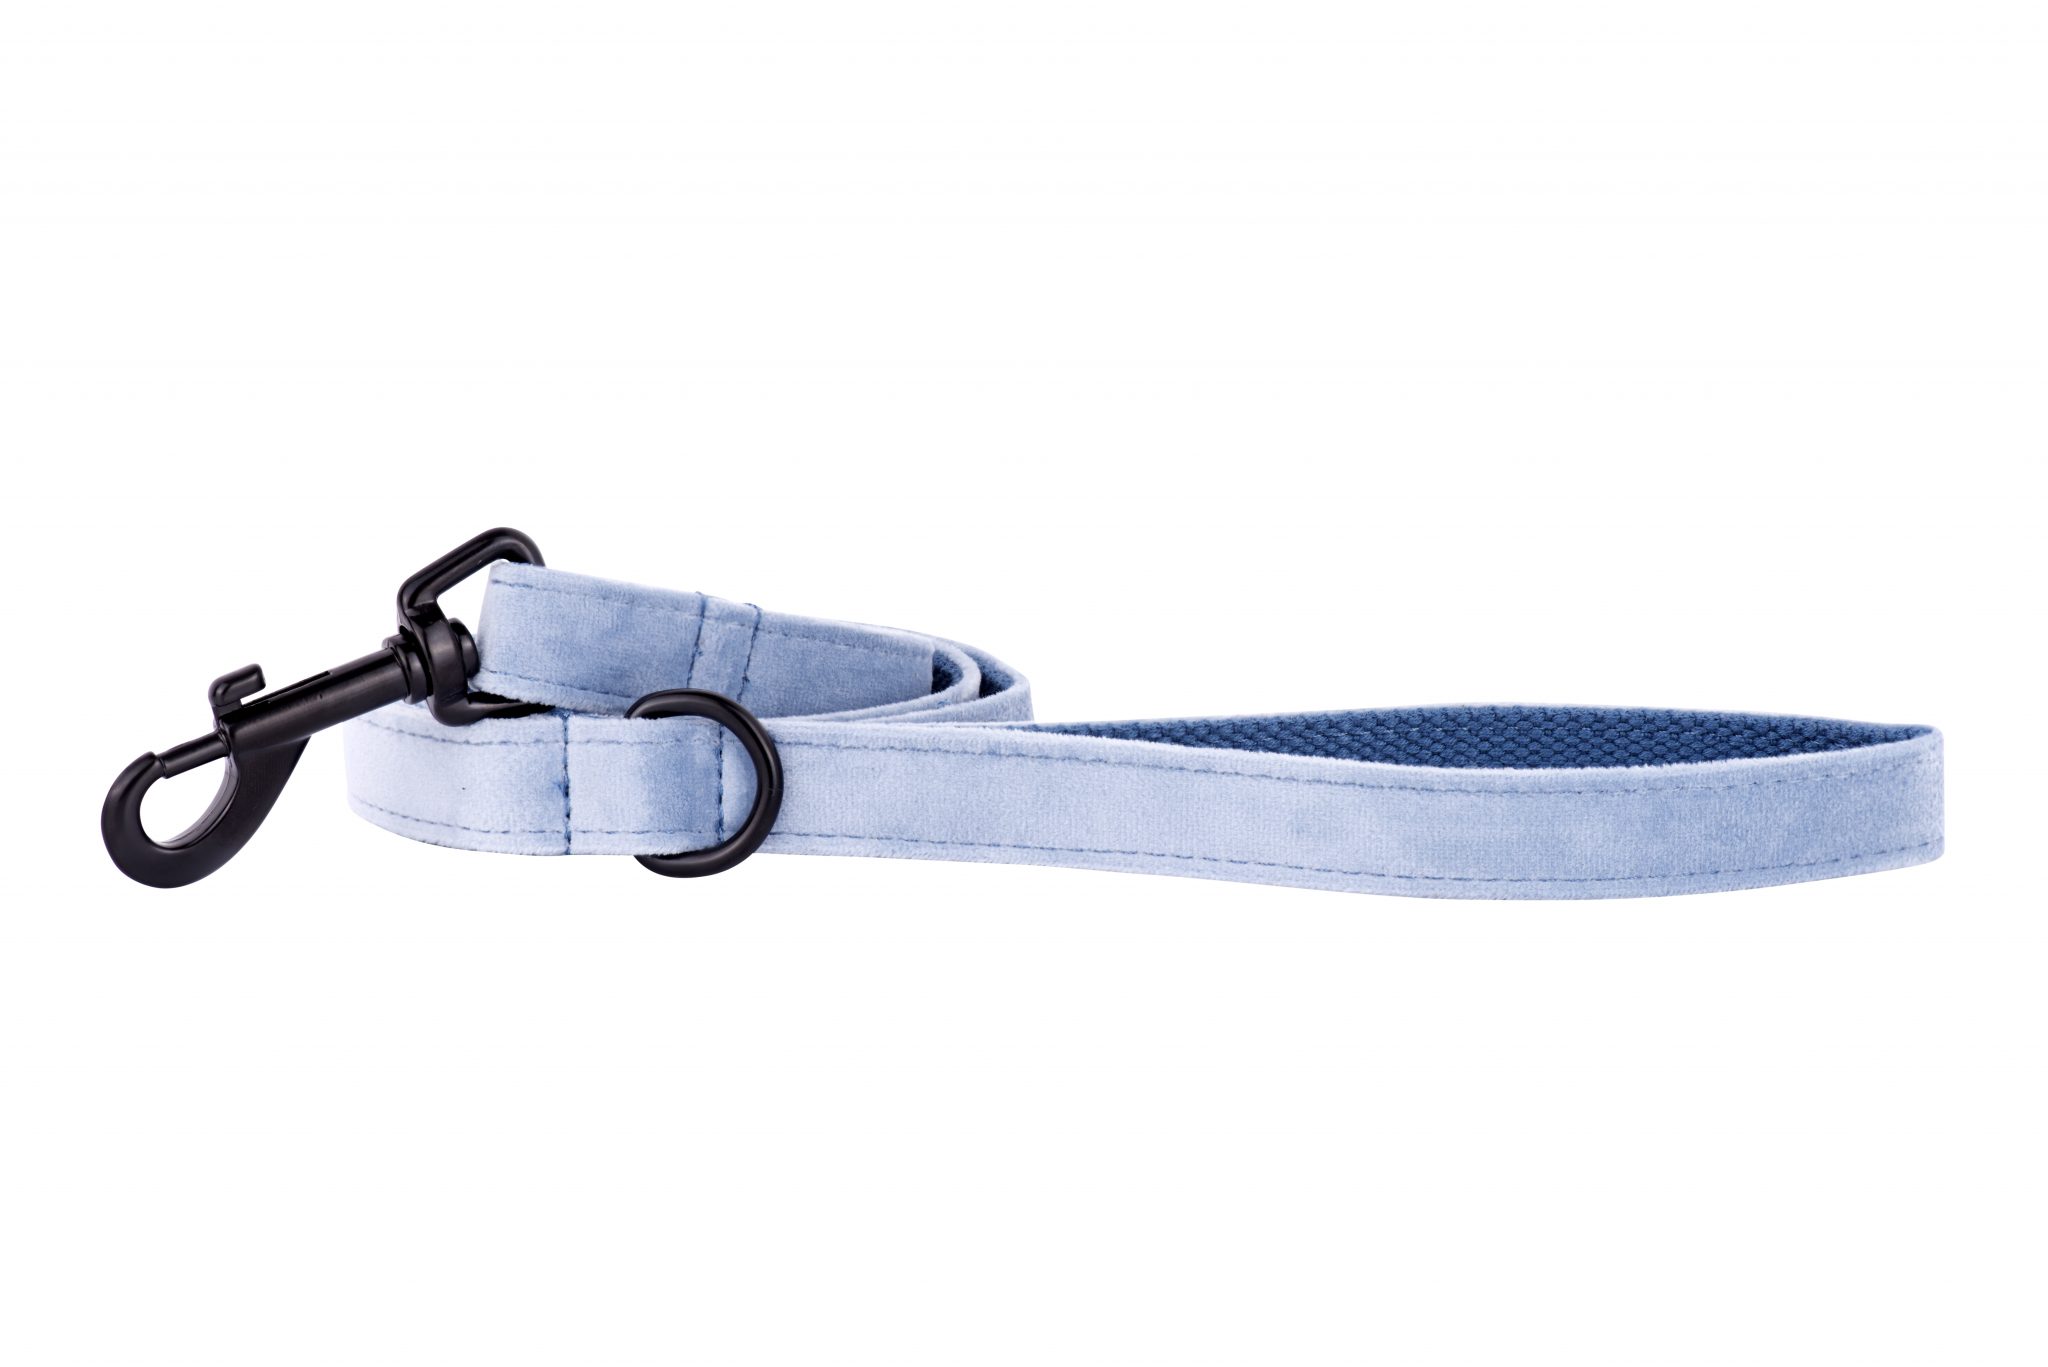 Sky designer dog lead by IWOOF with black fittings